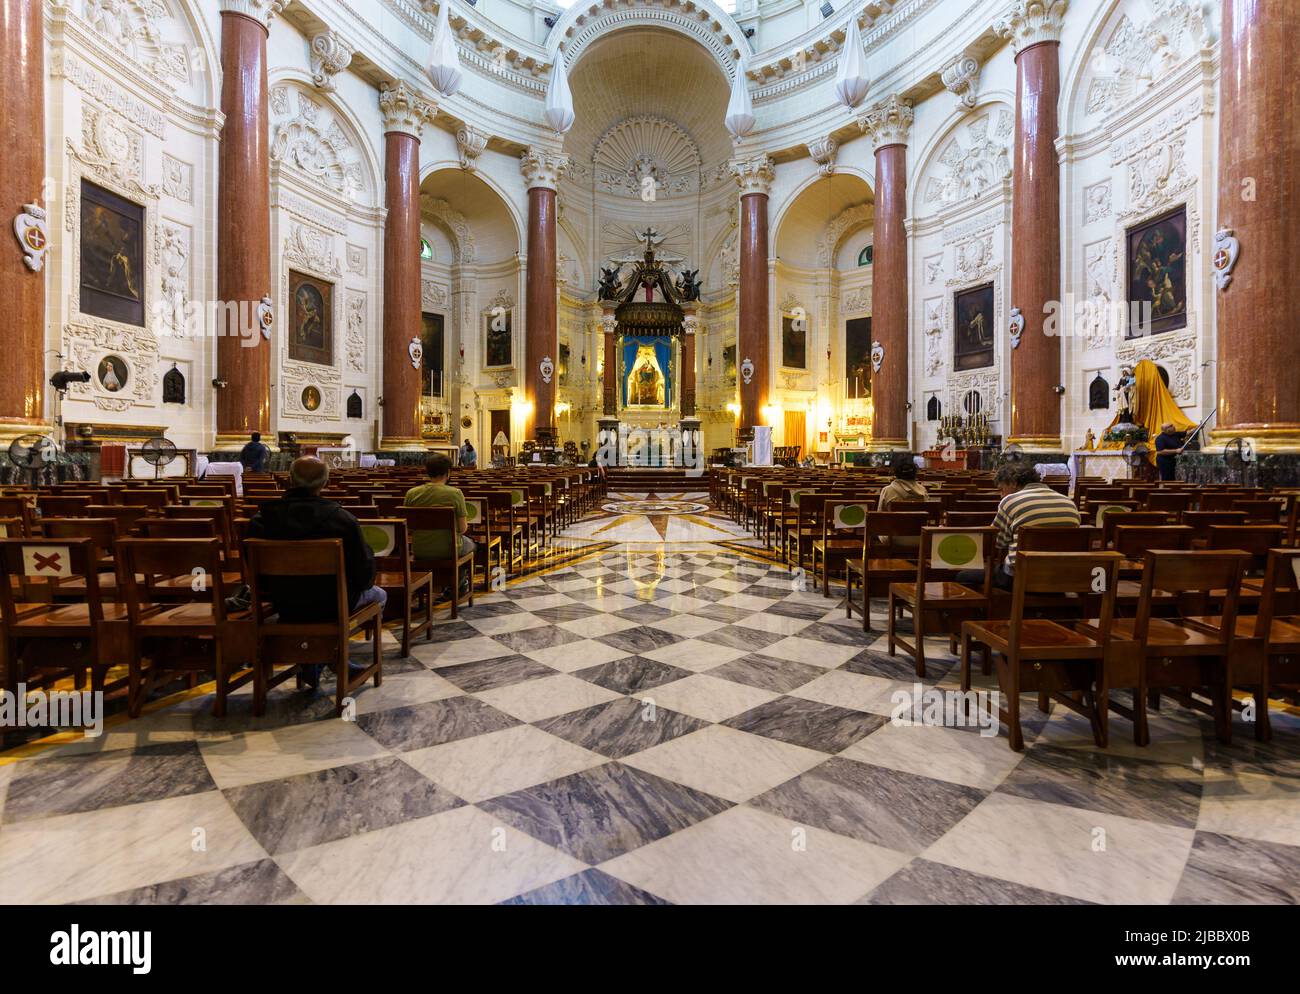 Valletta, Malta - November 27 2021: Interior view of the famous Basilica of Our Lady of Mount Carmel in Valletta medieval old town that dates back to Stock Photo